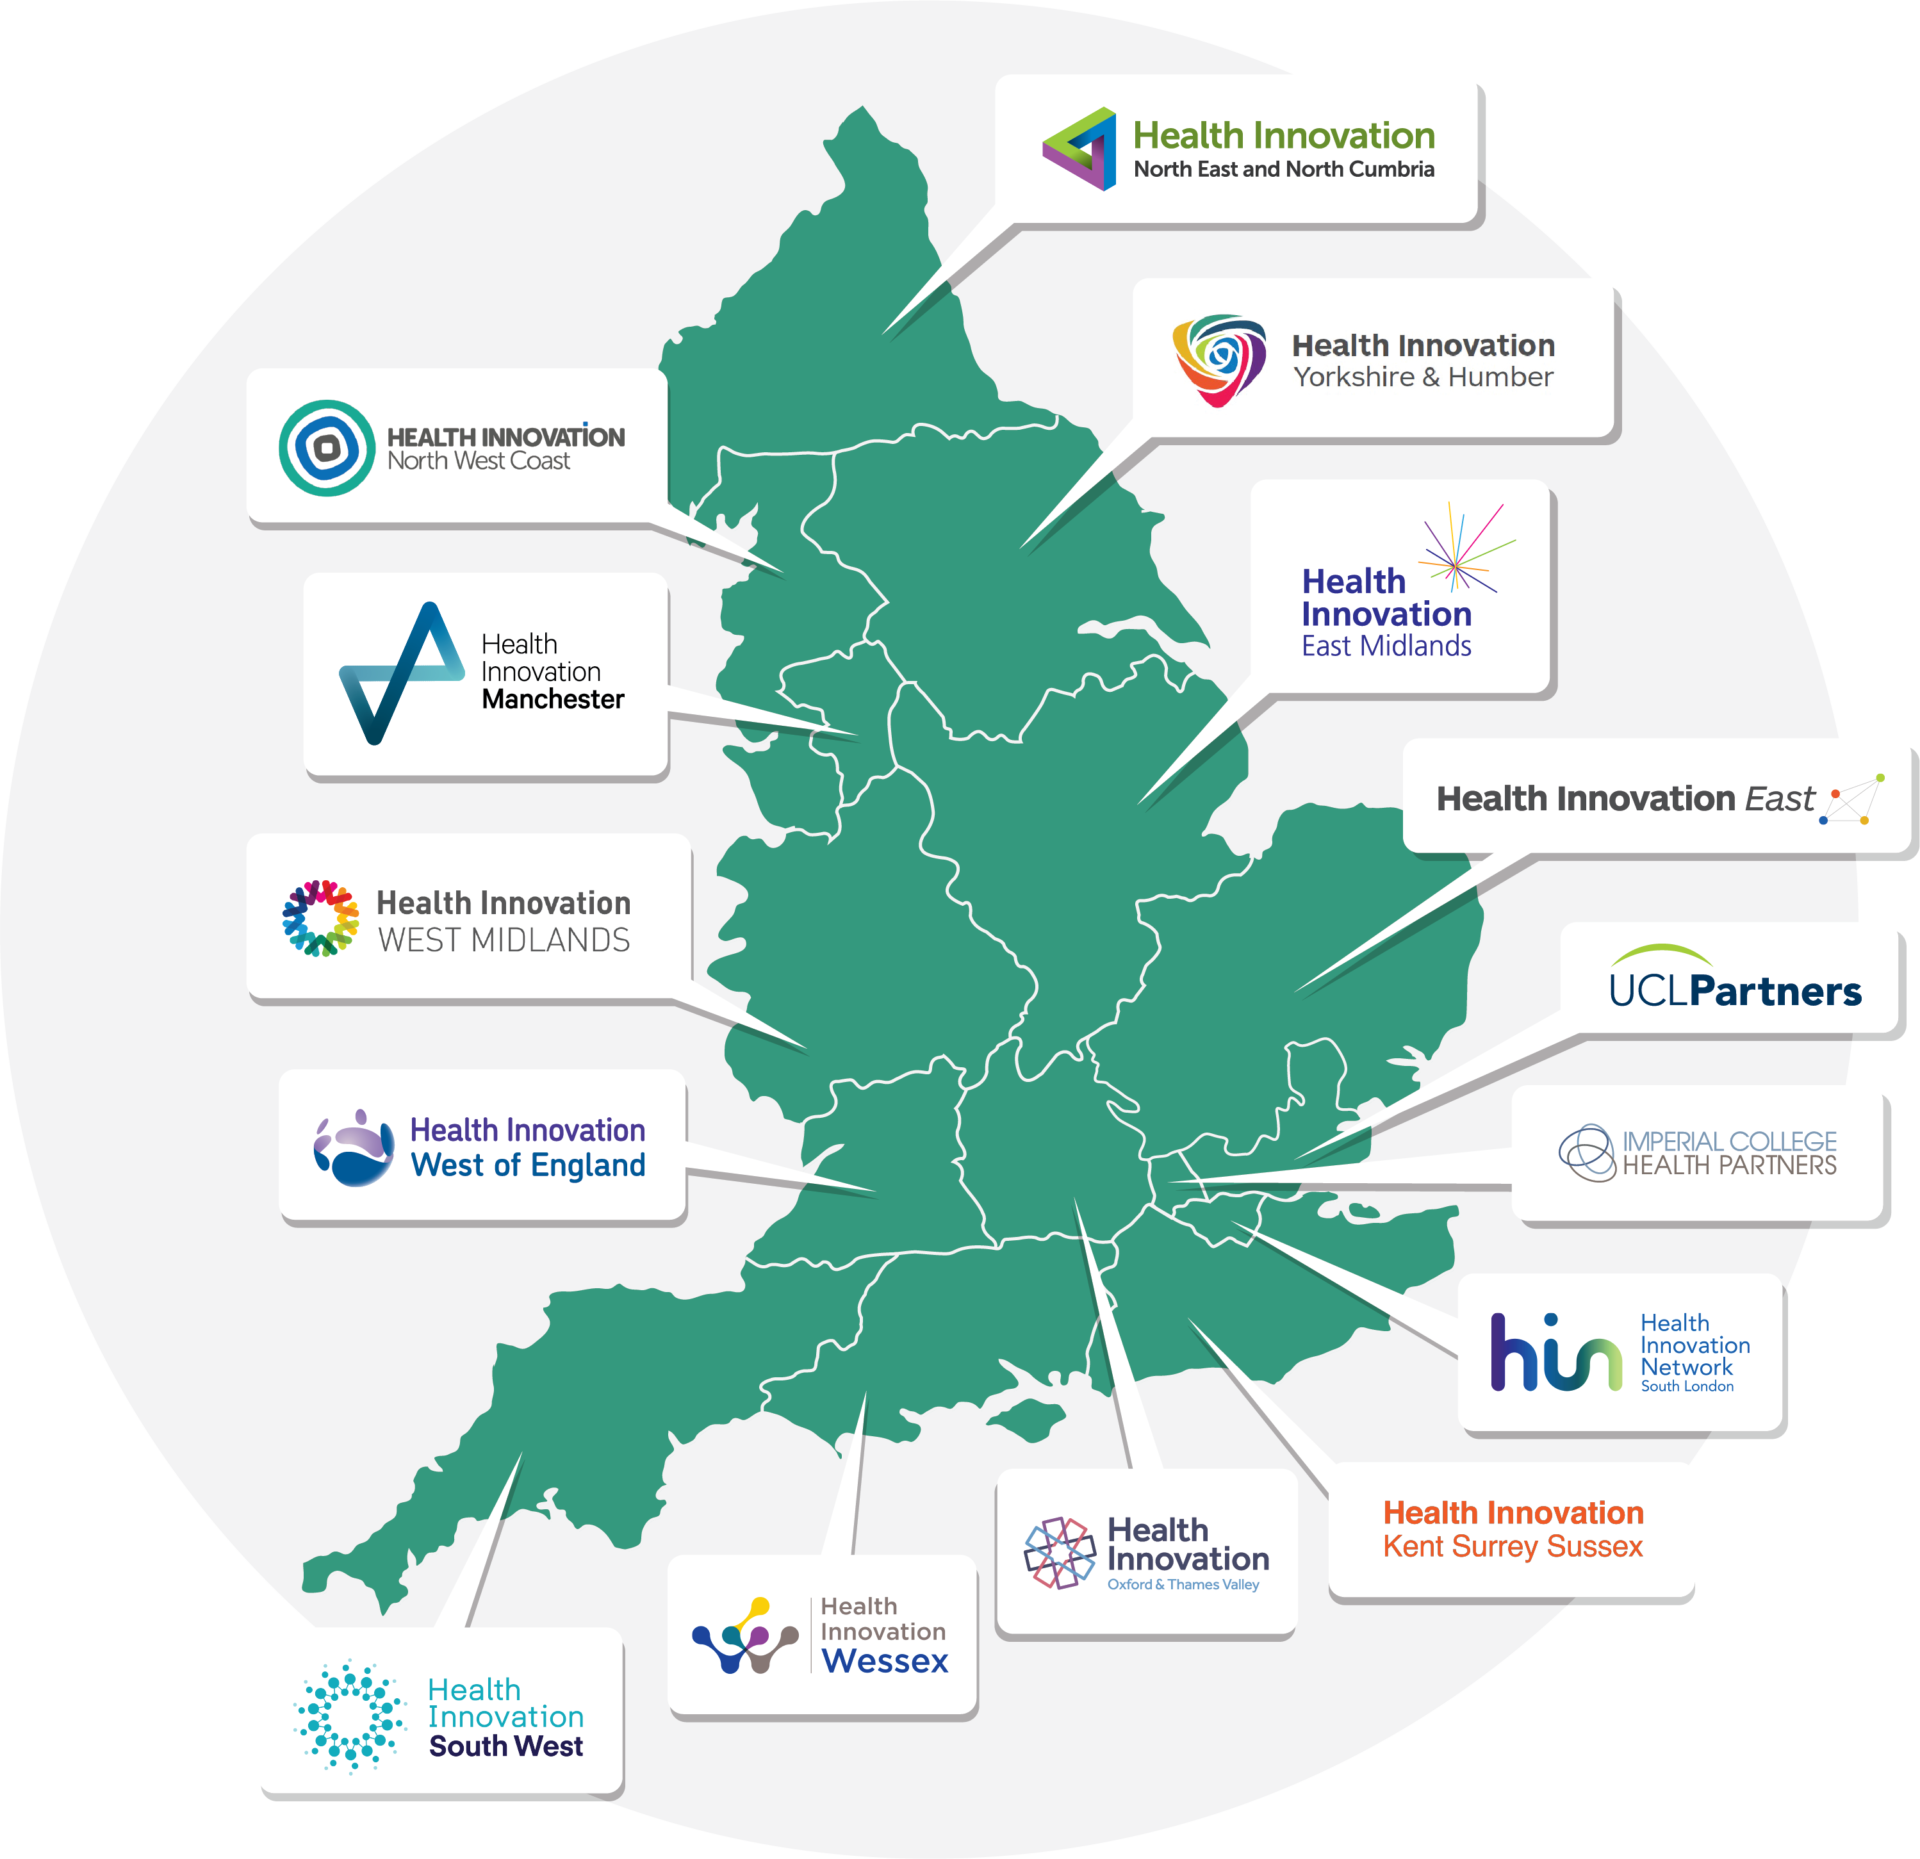 Outline map of England, split into regional areas to indicate which Health Innovation Network organisation operates in that area; a list of the Health Innovation Networks accompanies this image for those unable to visually see the map or are using assistance tools.